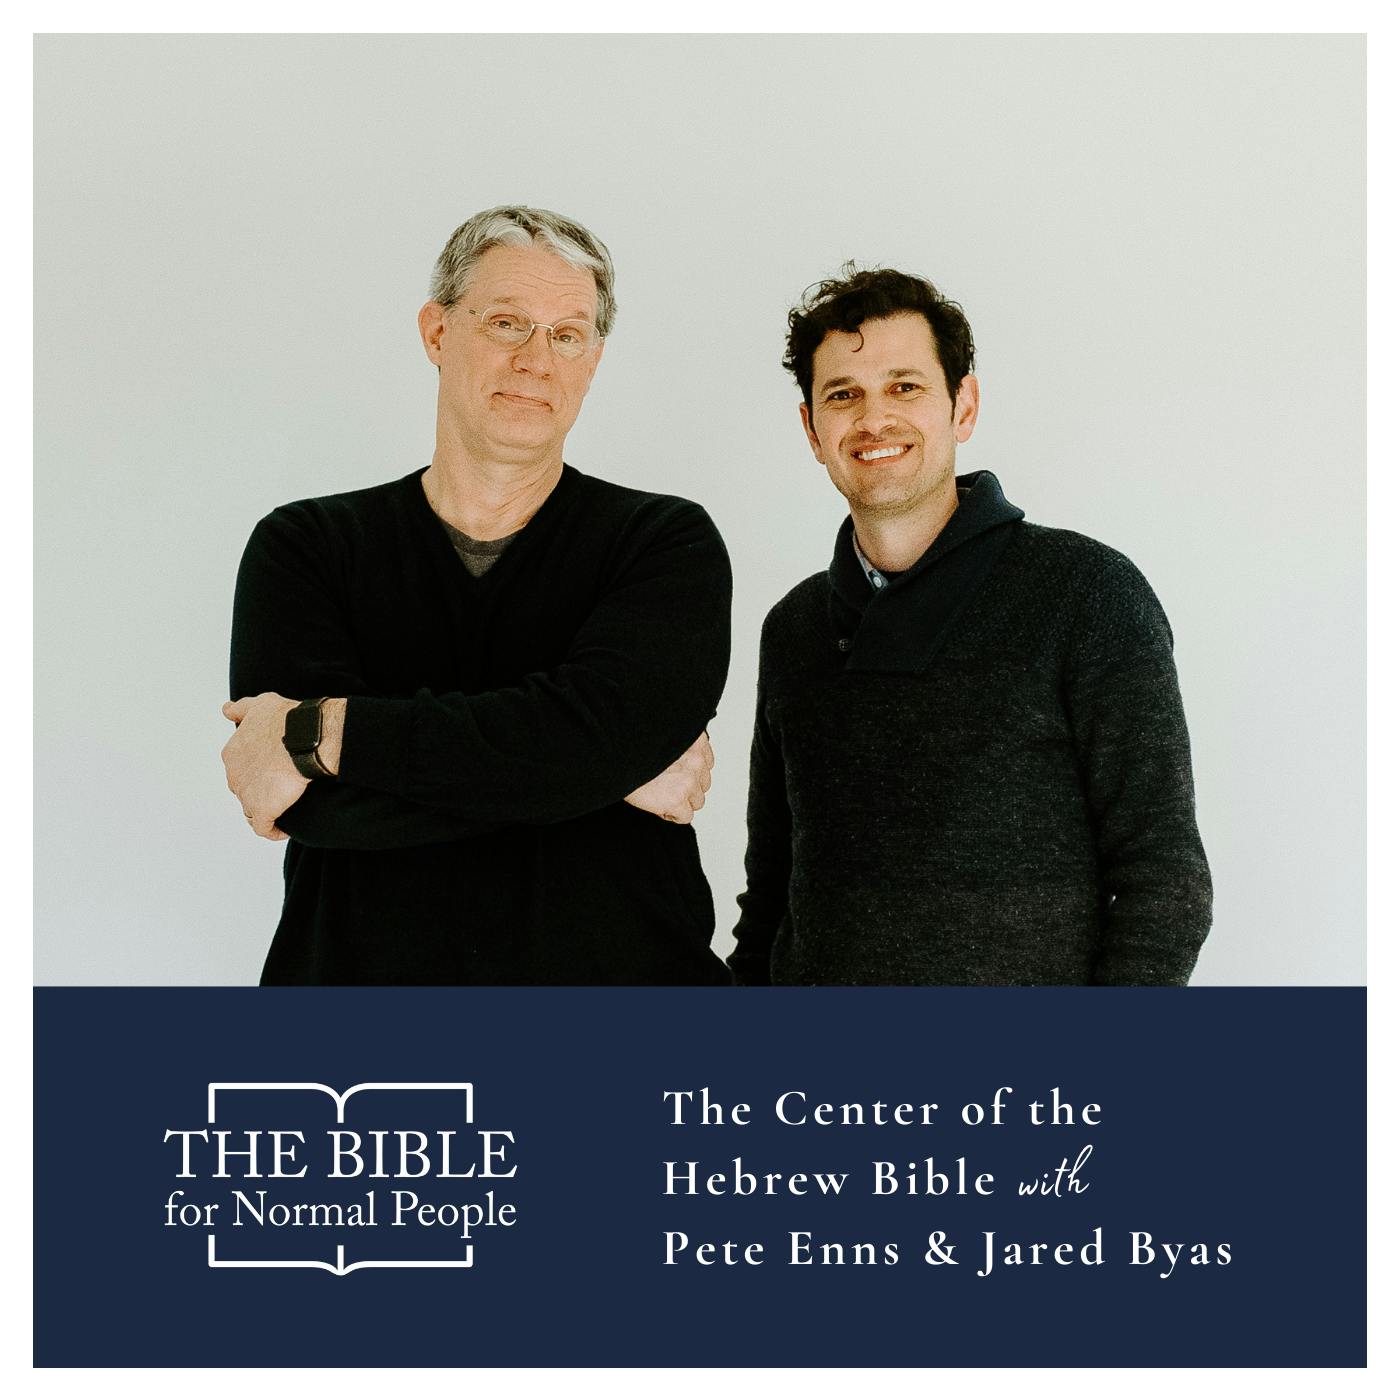 Episode 215: Pete Enns & Jared Byas - The Center of the Hebrew Bible